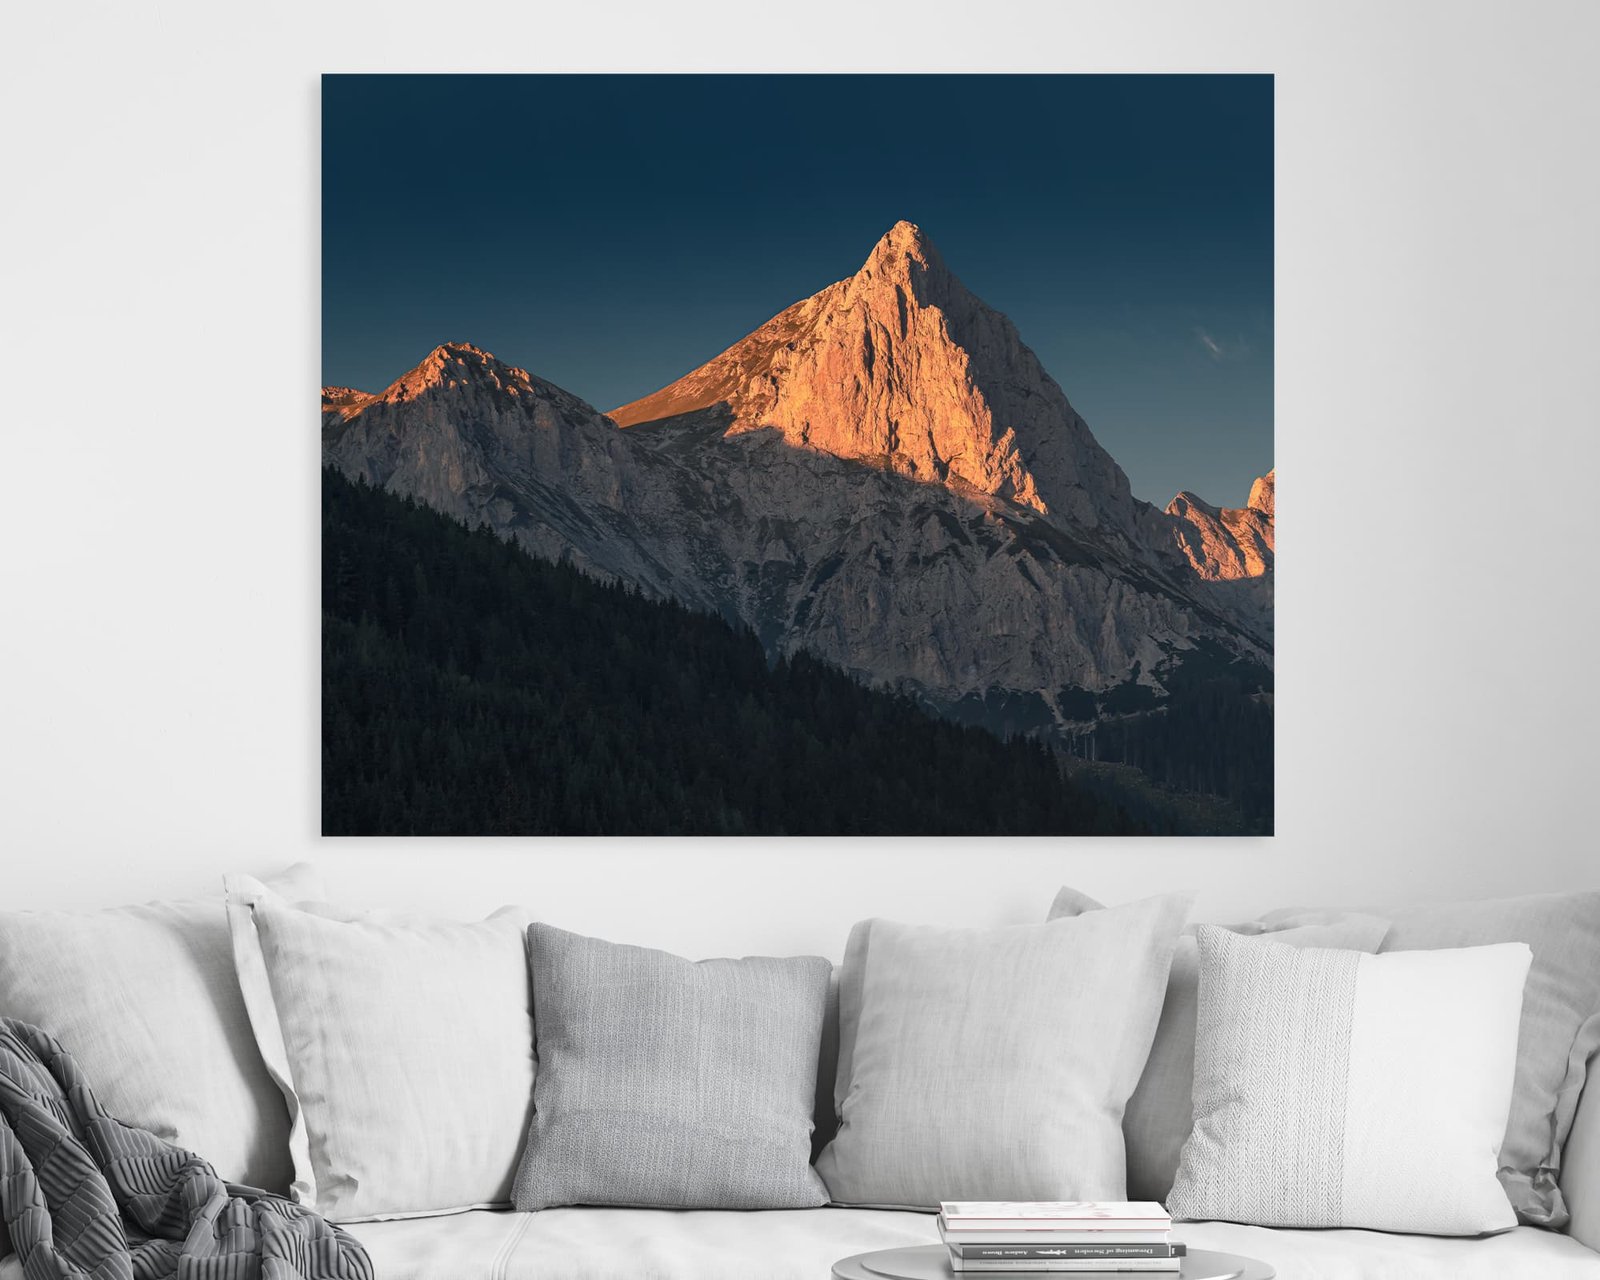 Wall art of a mountain during sunset under a blue sky